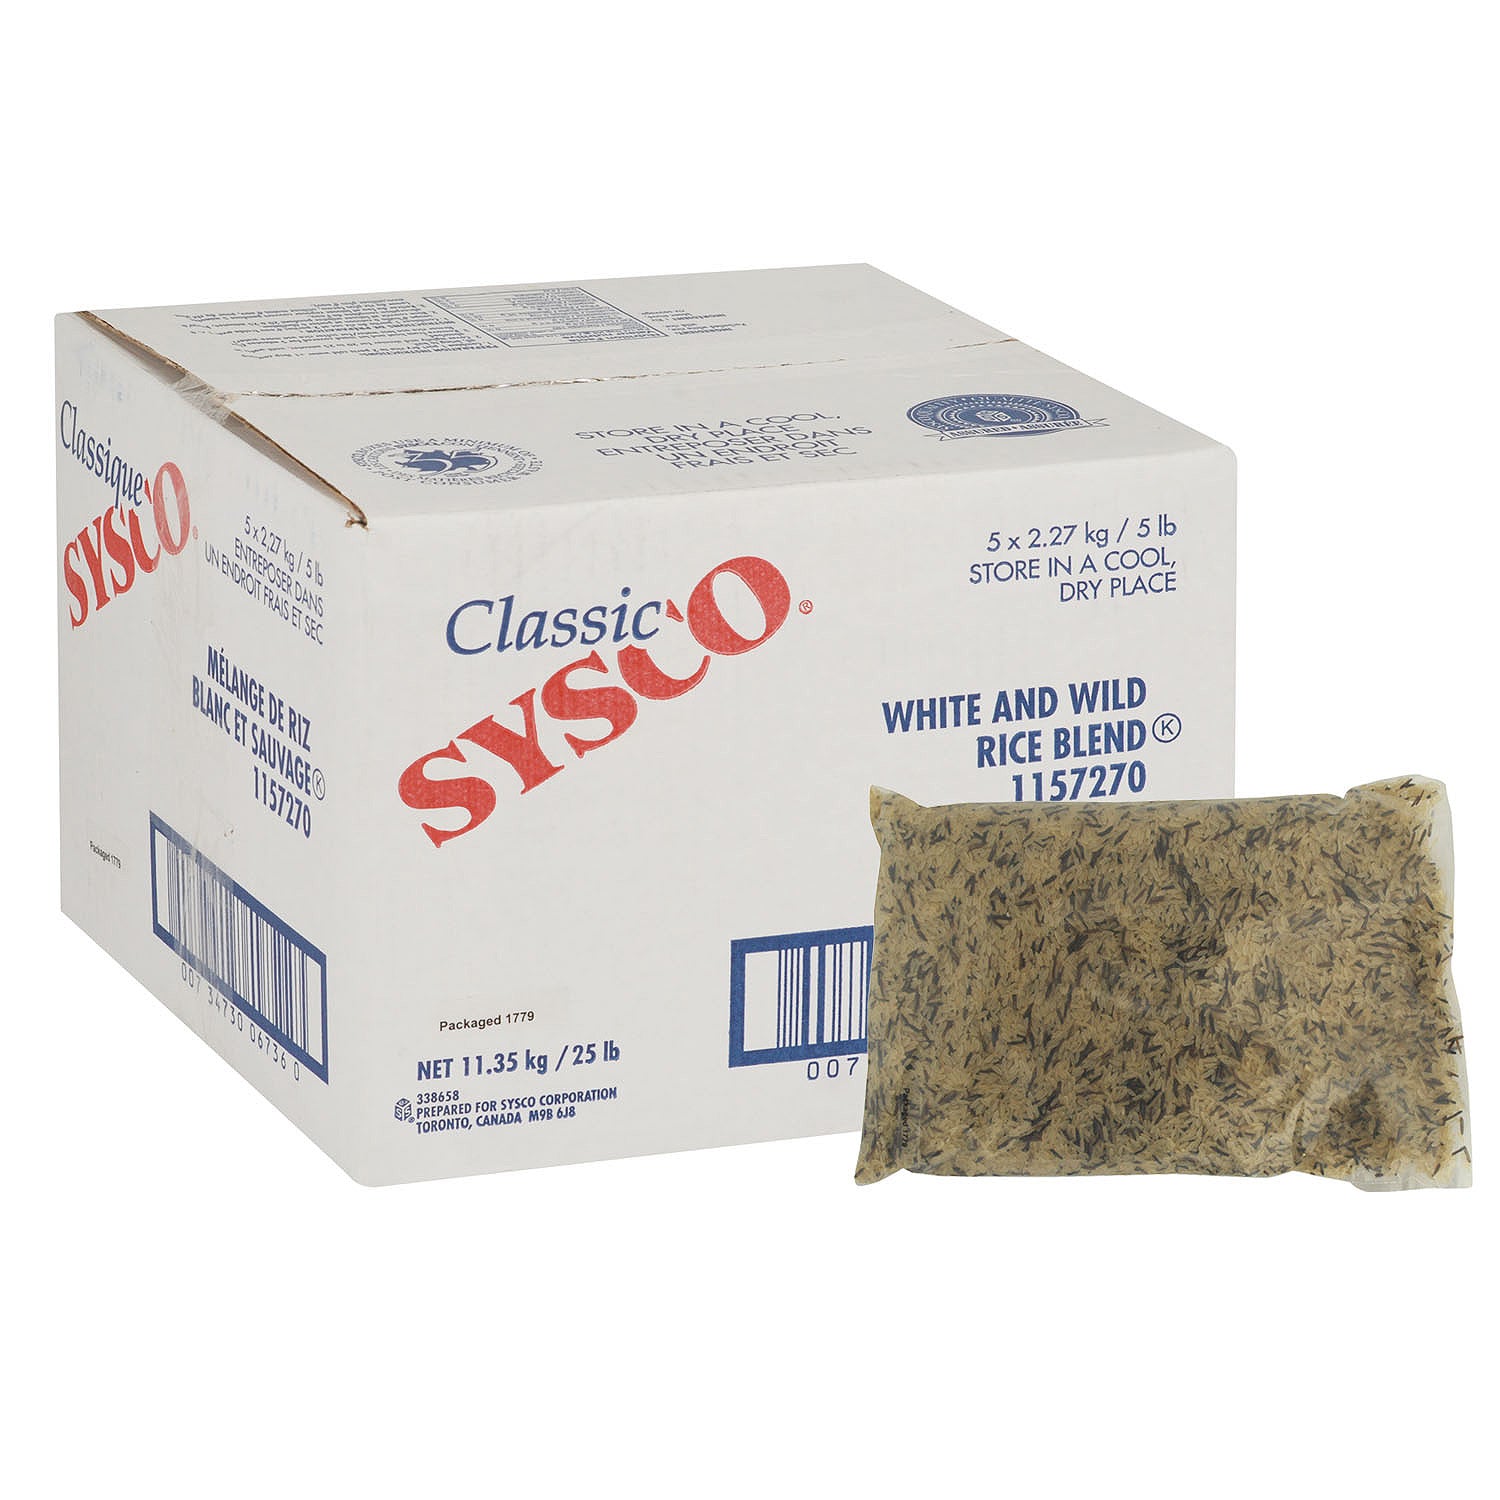 Sysco Classic White & Wild Rice Blend 2.27kg [$1.89/serving]